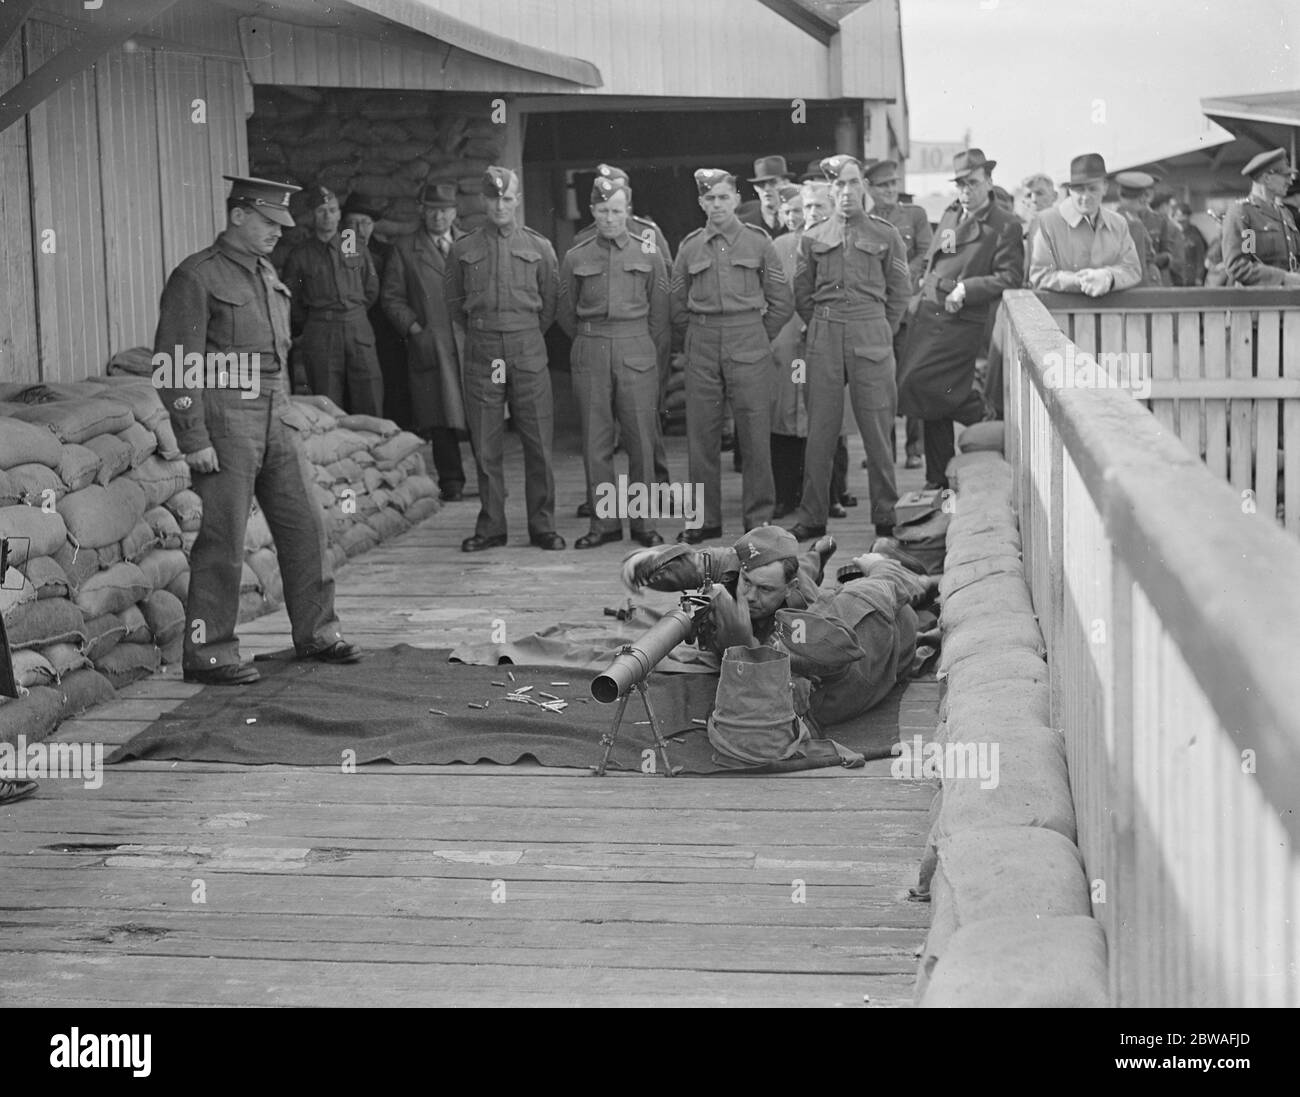 Amps (Hilfsmilitärisches Pioneer Corps) Depot in Clacton. 17. April 1940 Stockfoto